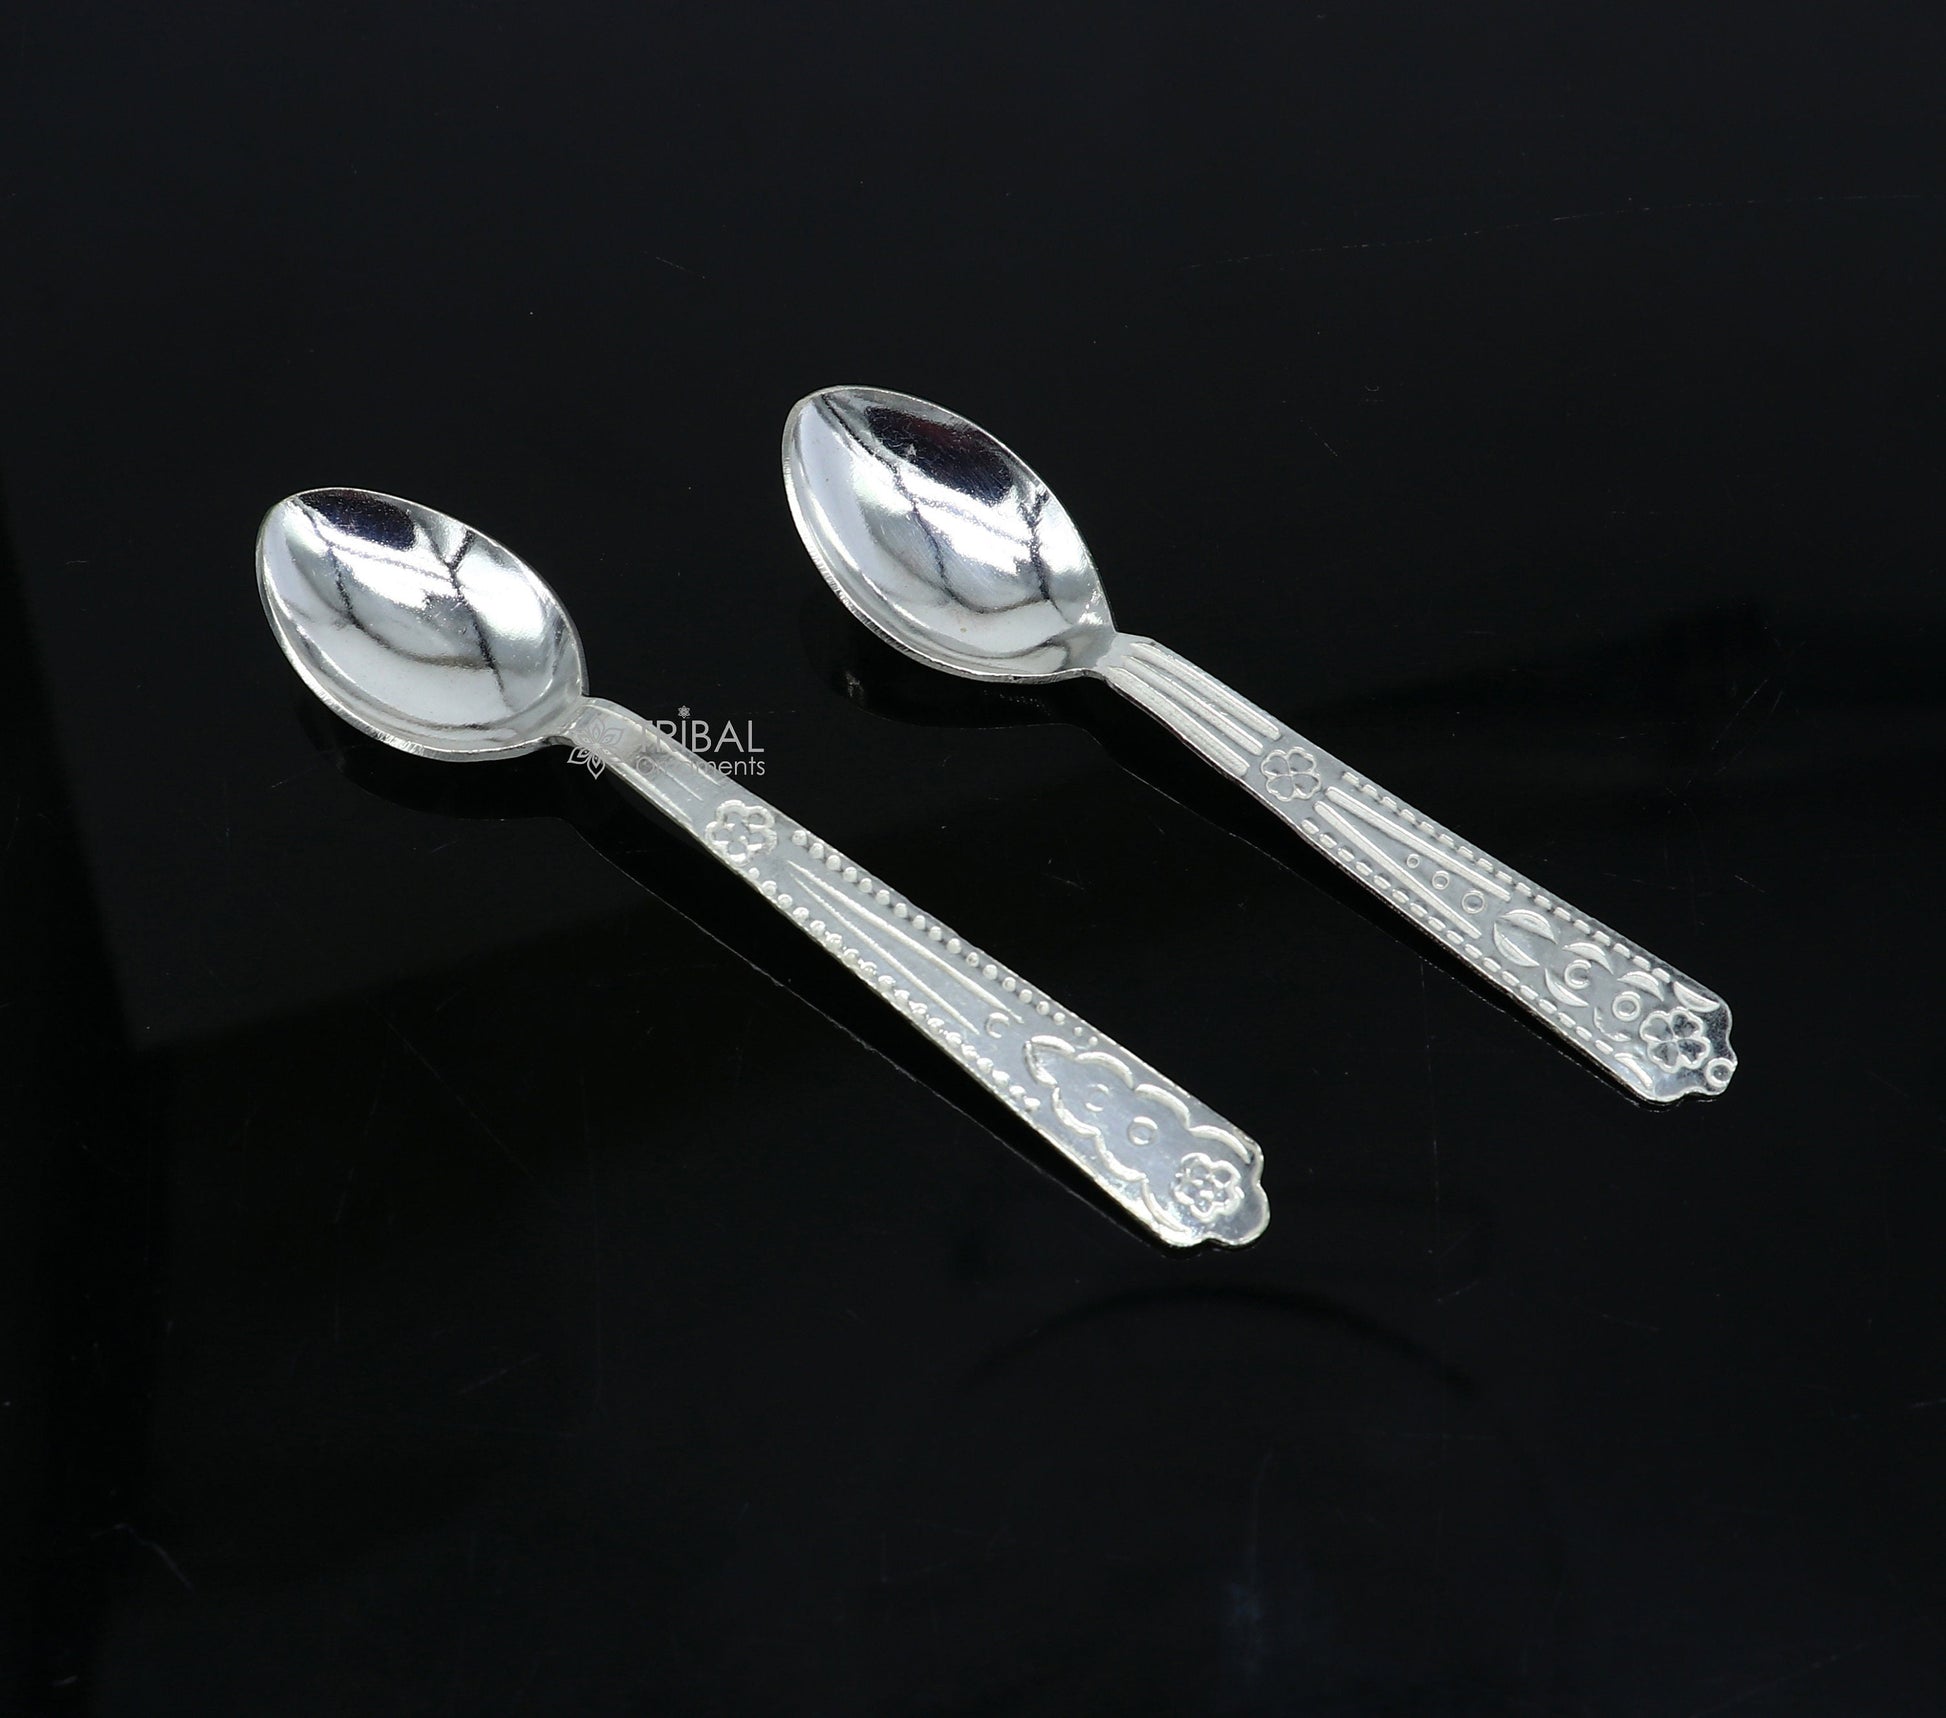 925 sterling silver handmade solid silver spoon for new born baby serving, silver has antibacterial properties, keep stay healthy sv282 - TRIBAL ORNAMENTS